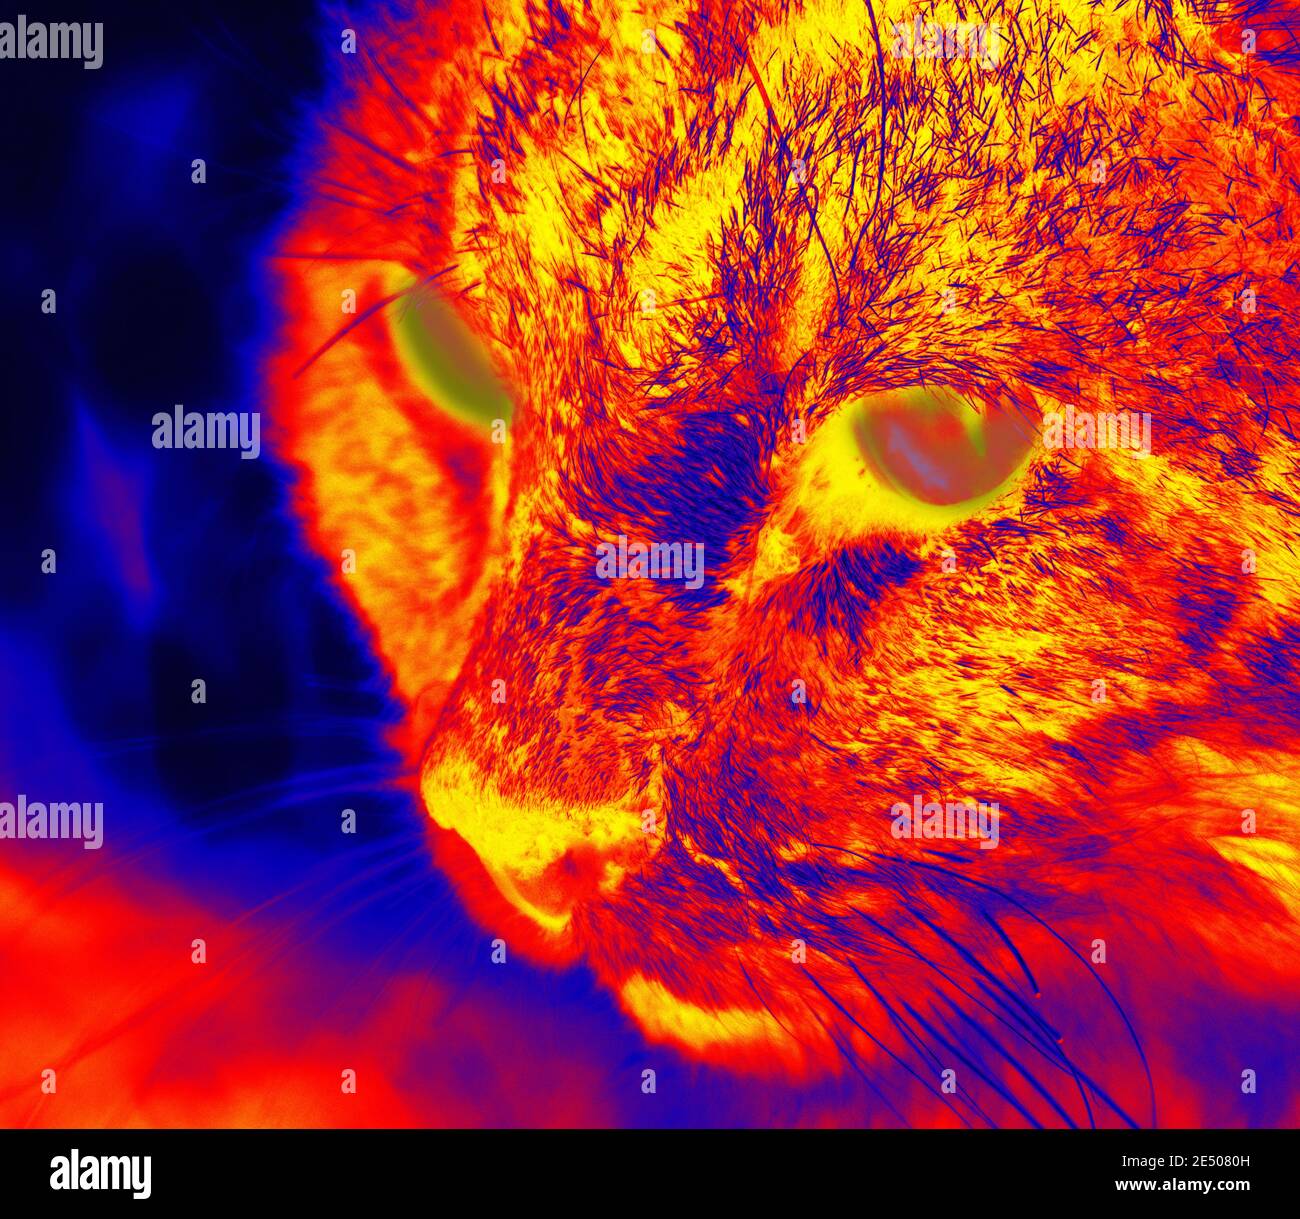 Cat sits on pavement in scientific high-tech thermal imager on night background Stock Photo